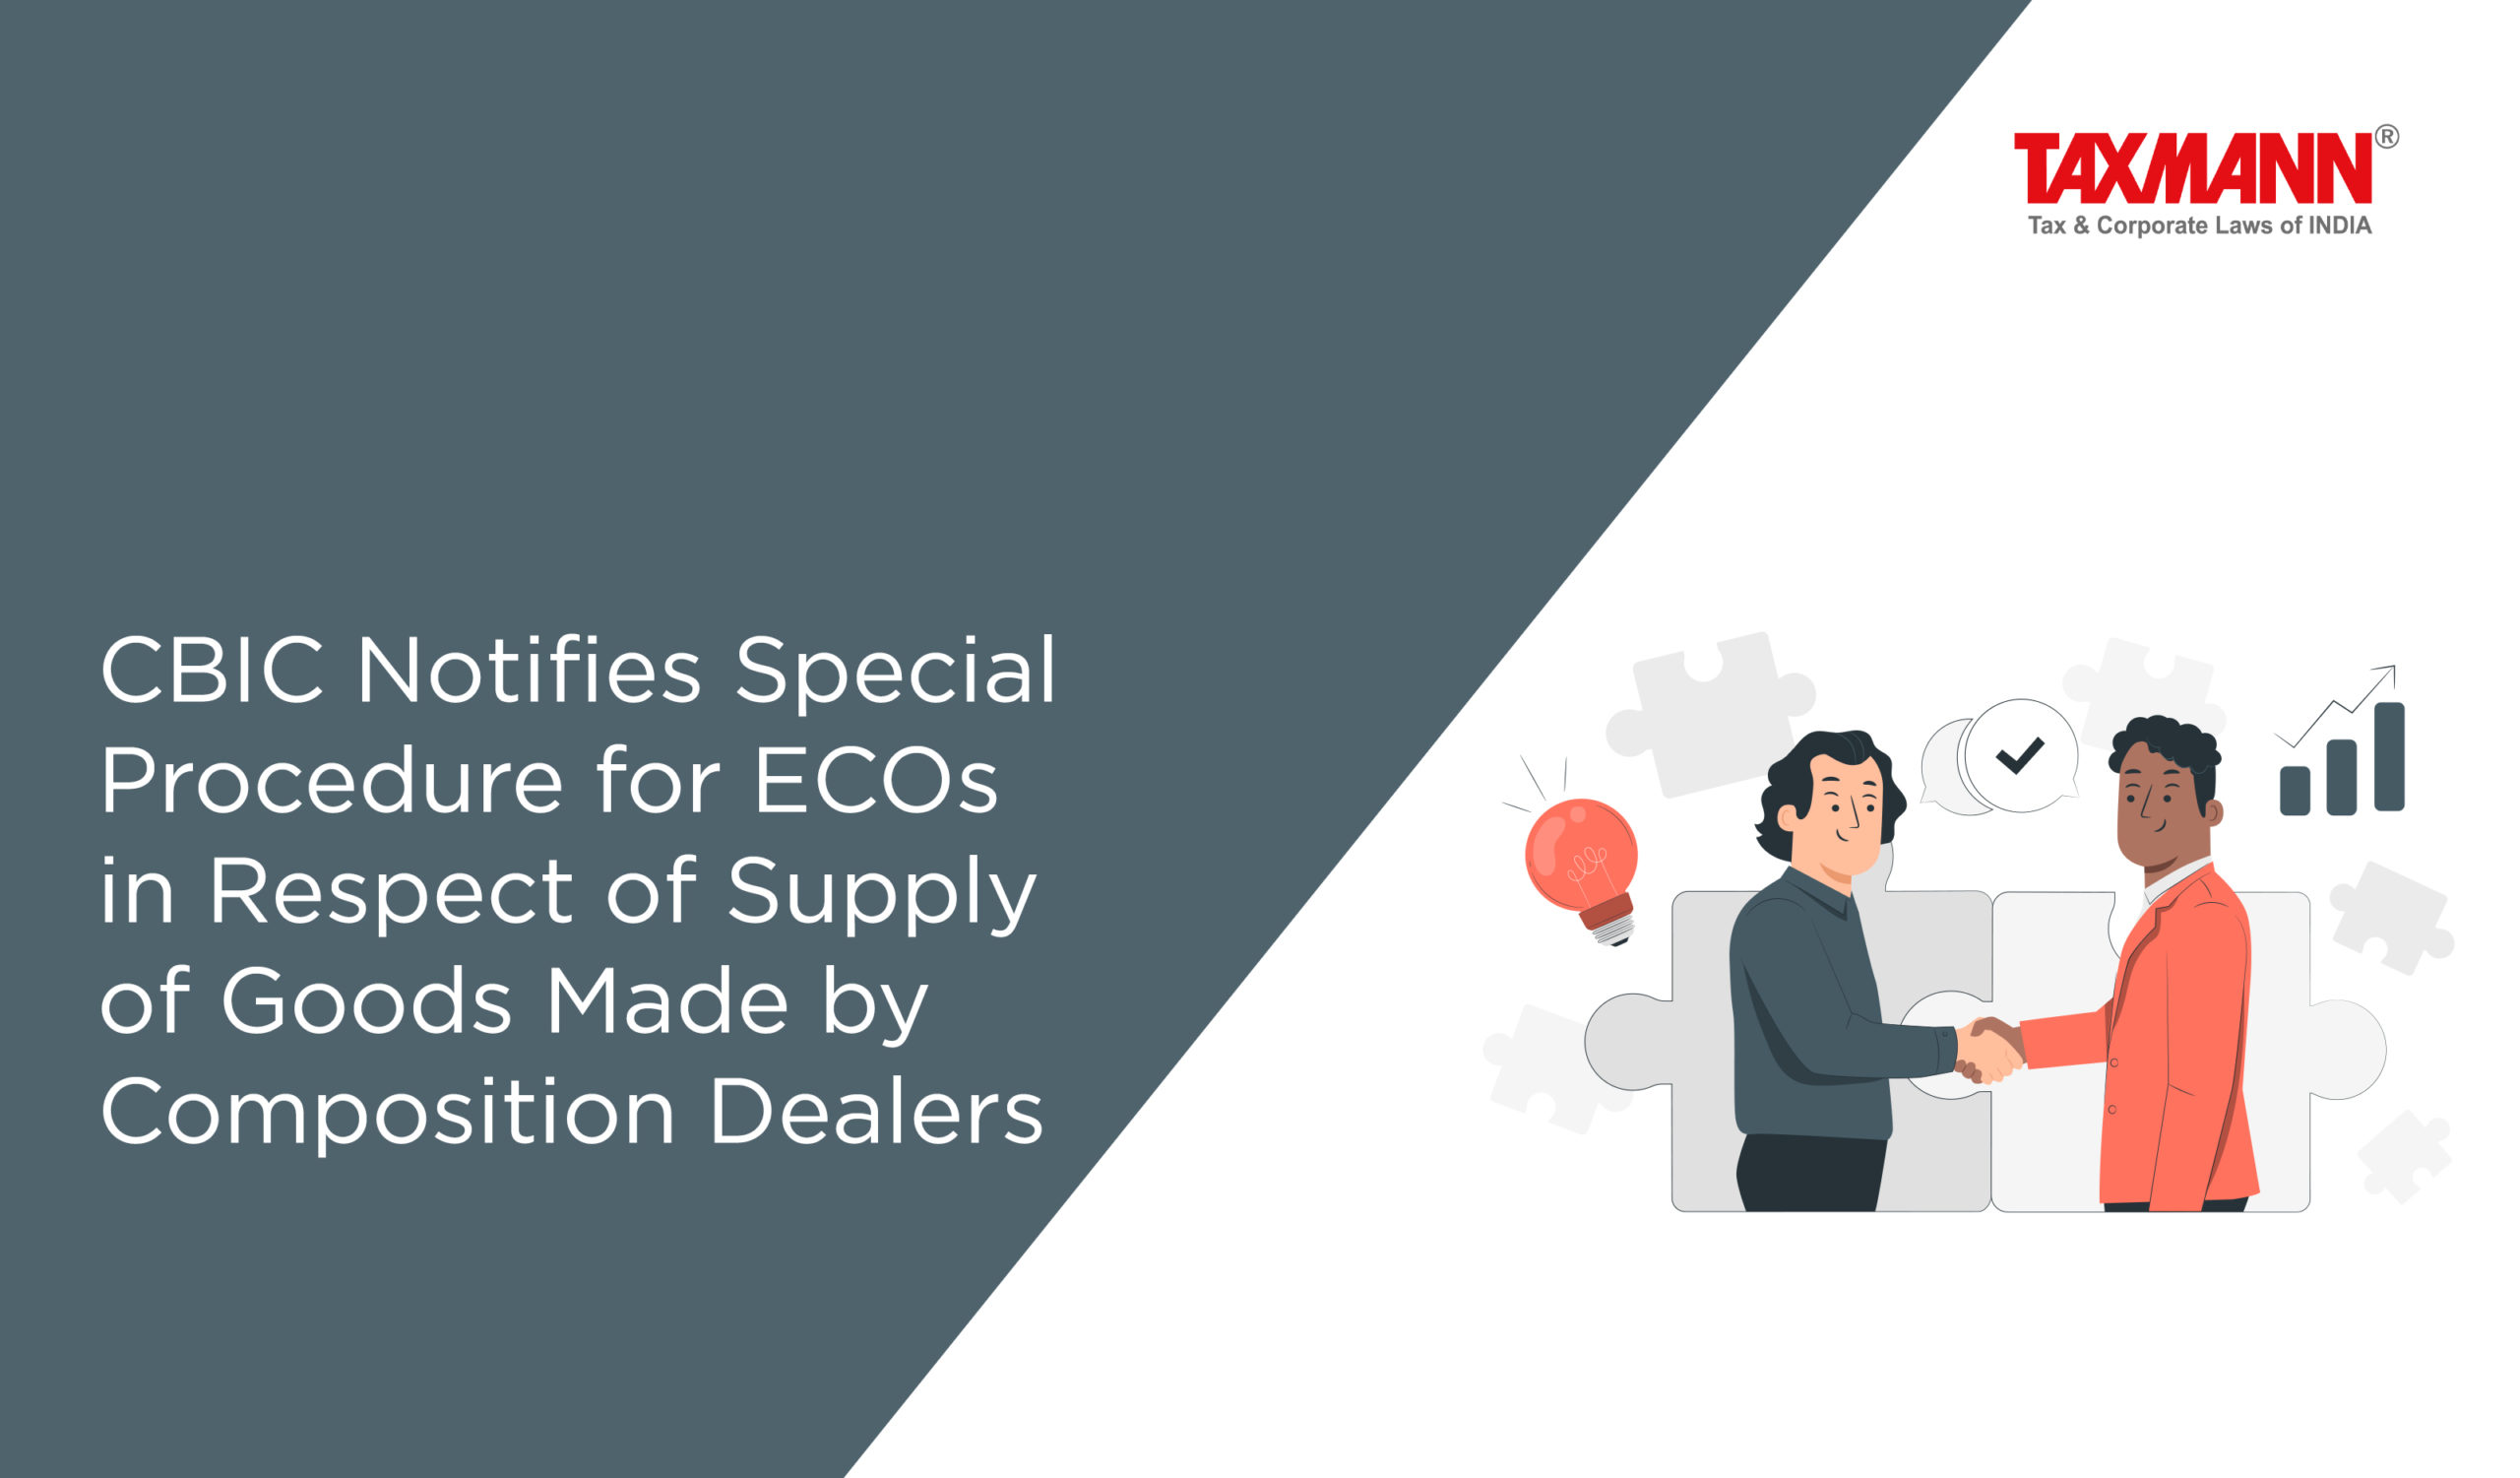 ECOs Supply of Goods Made by Composition Dealers